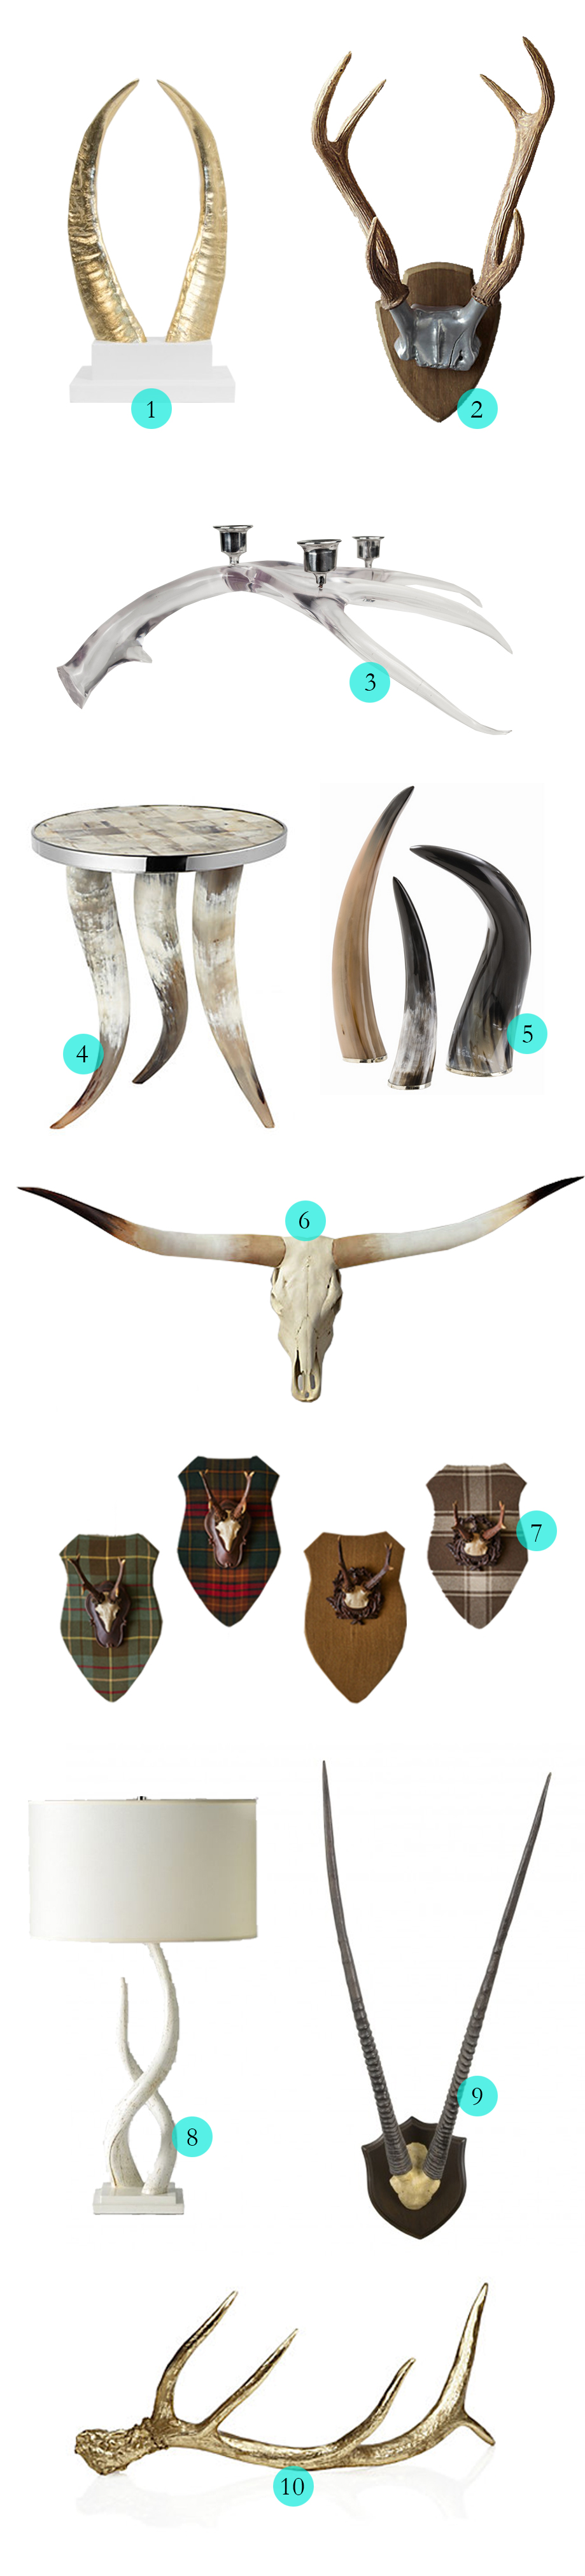 Tuesday Ten: Horns & Antlers in Home Decor via Havenly